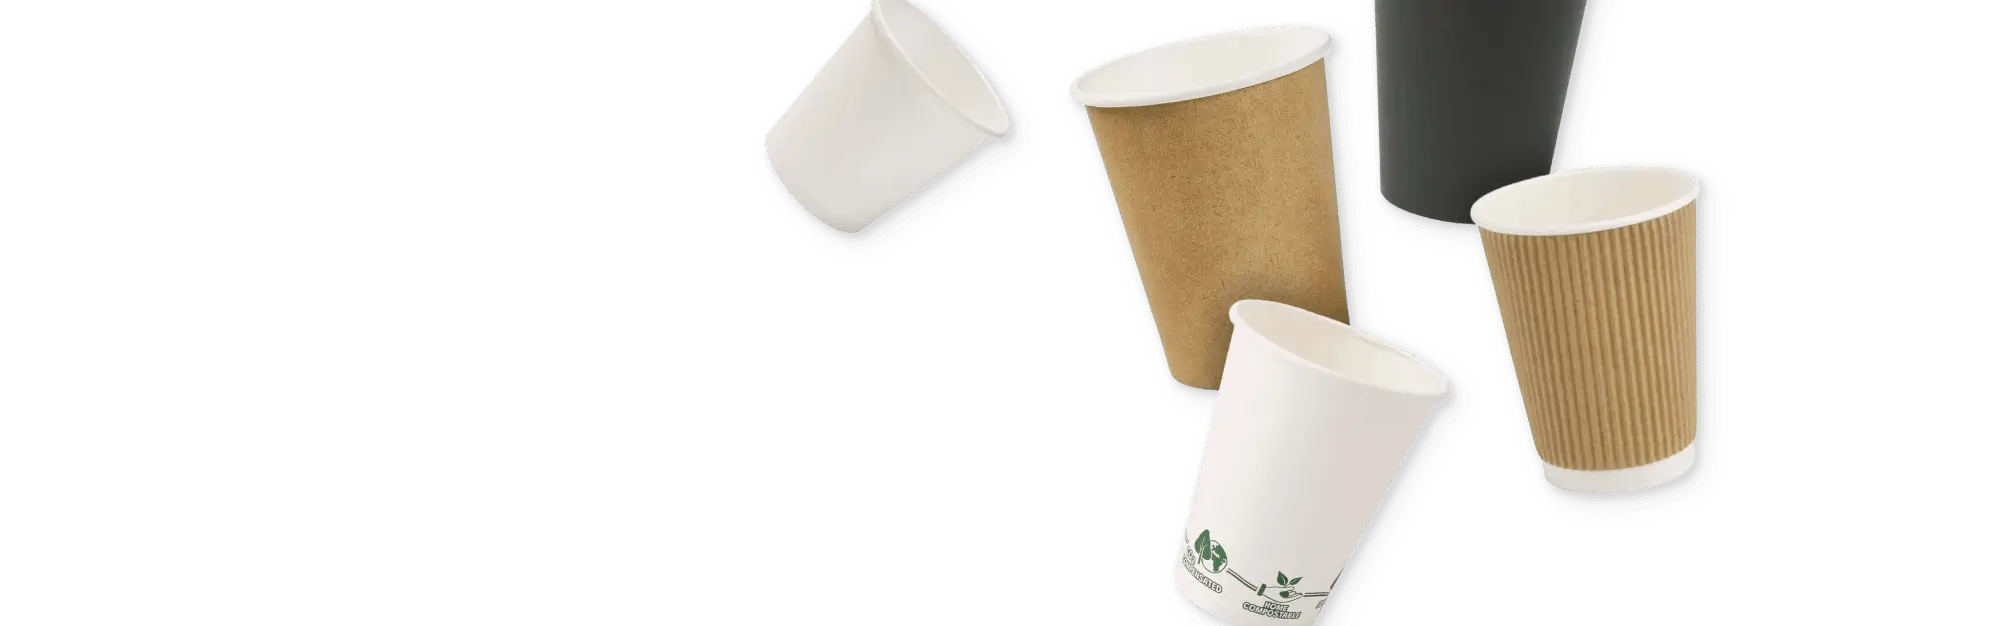 PAPER CUPS FROM ECOBIOPACK